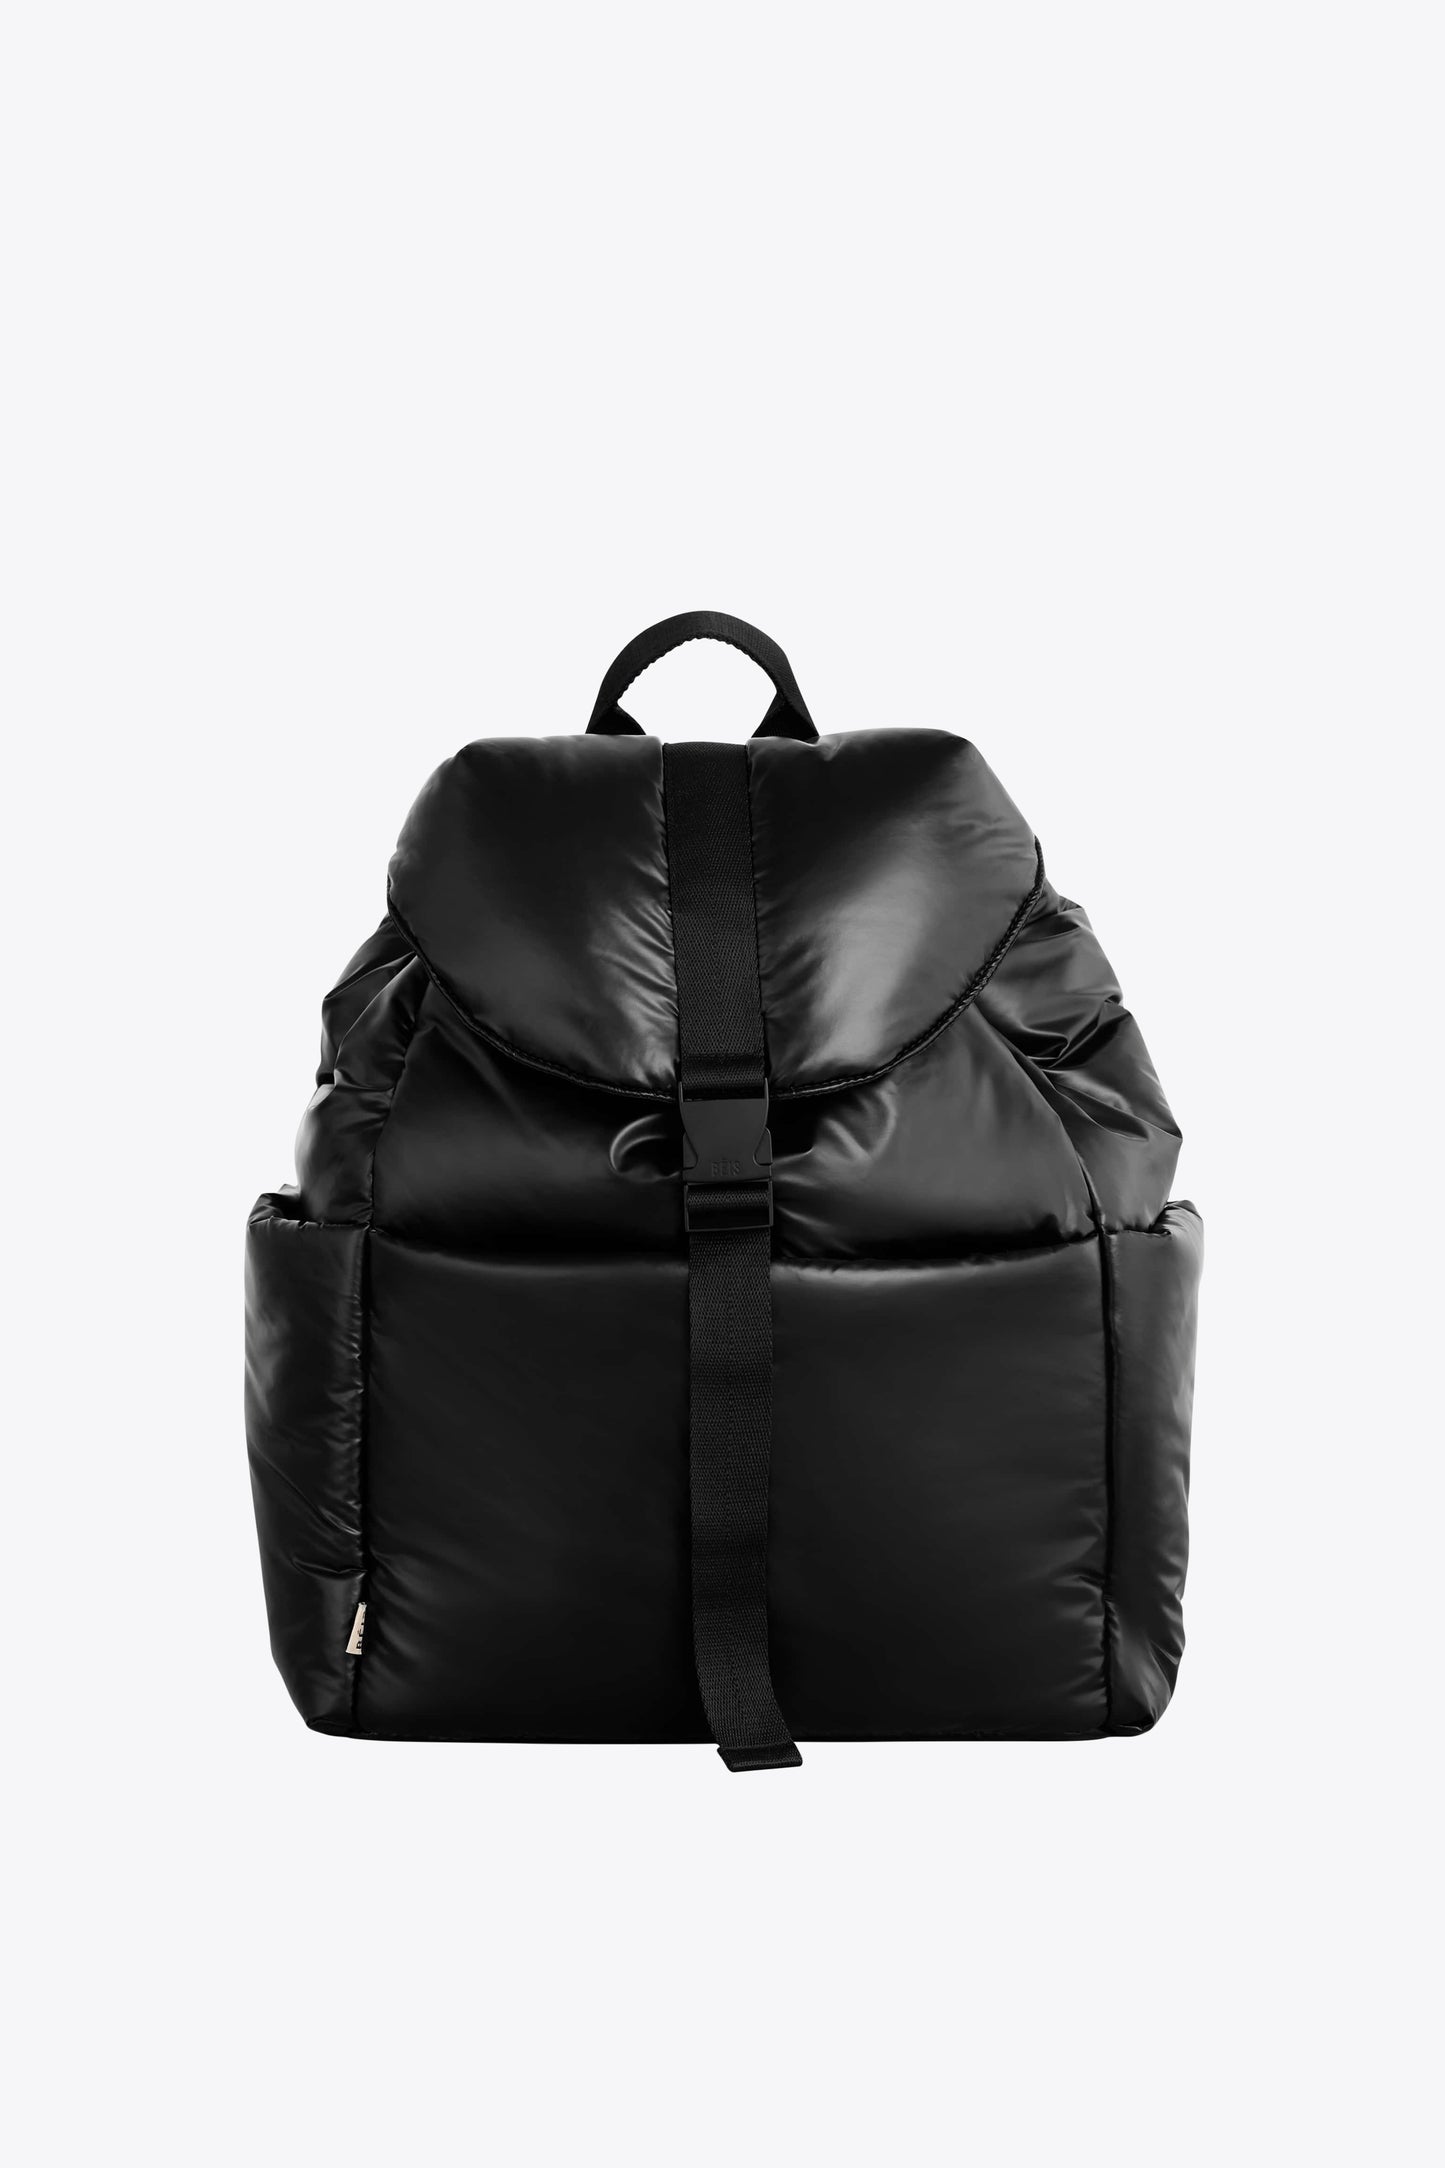 The Cargo Backpack in Black